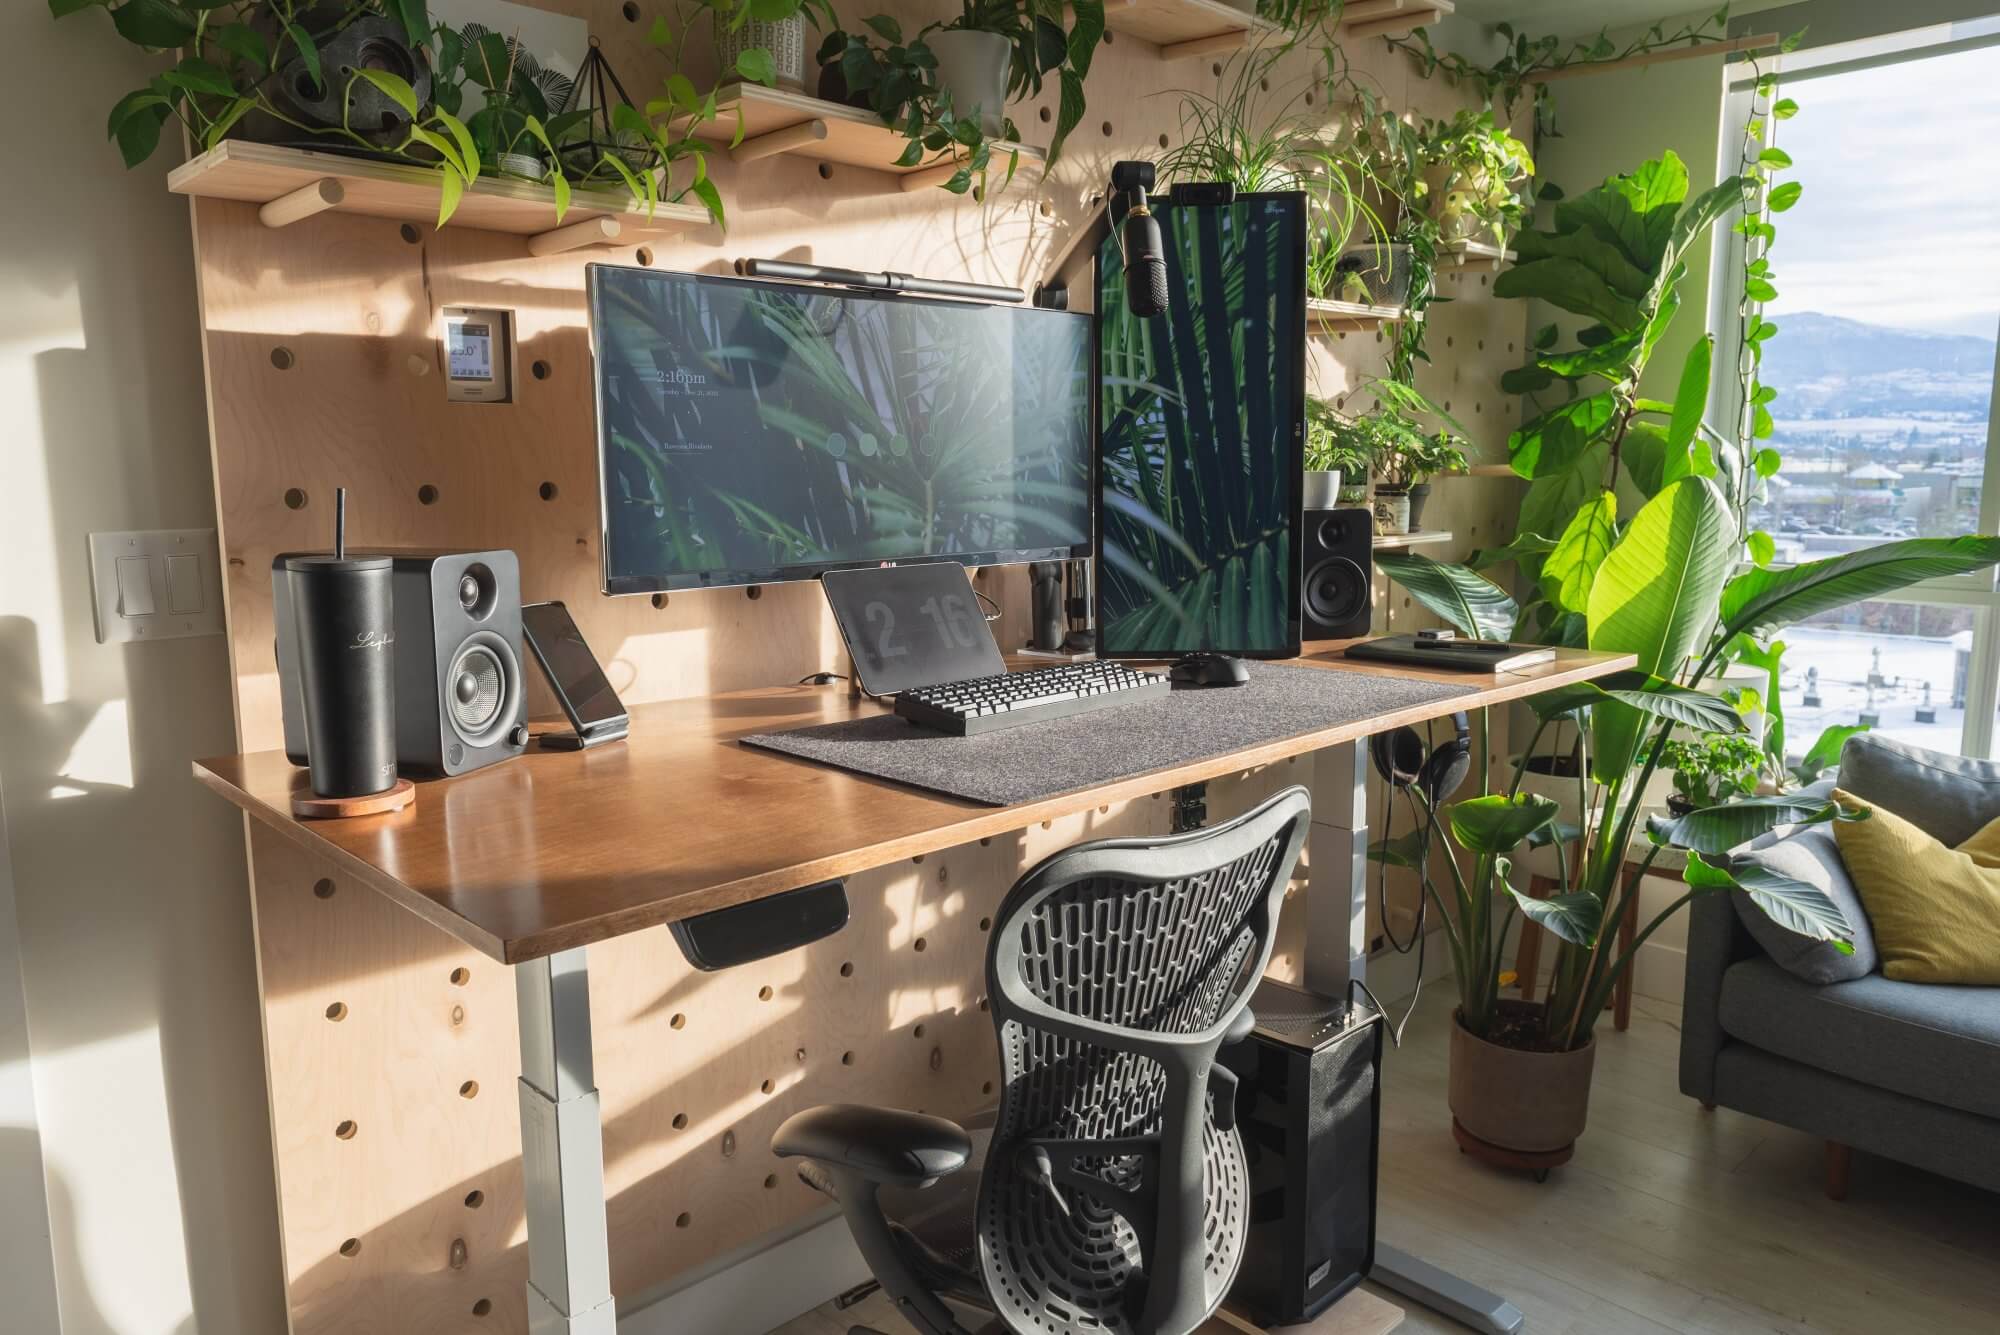 A nature-inspired workspace